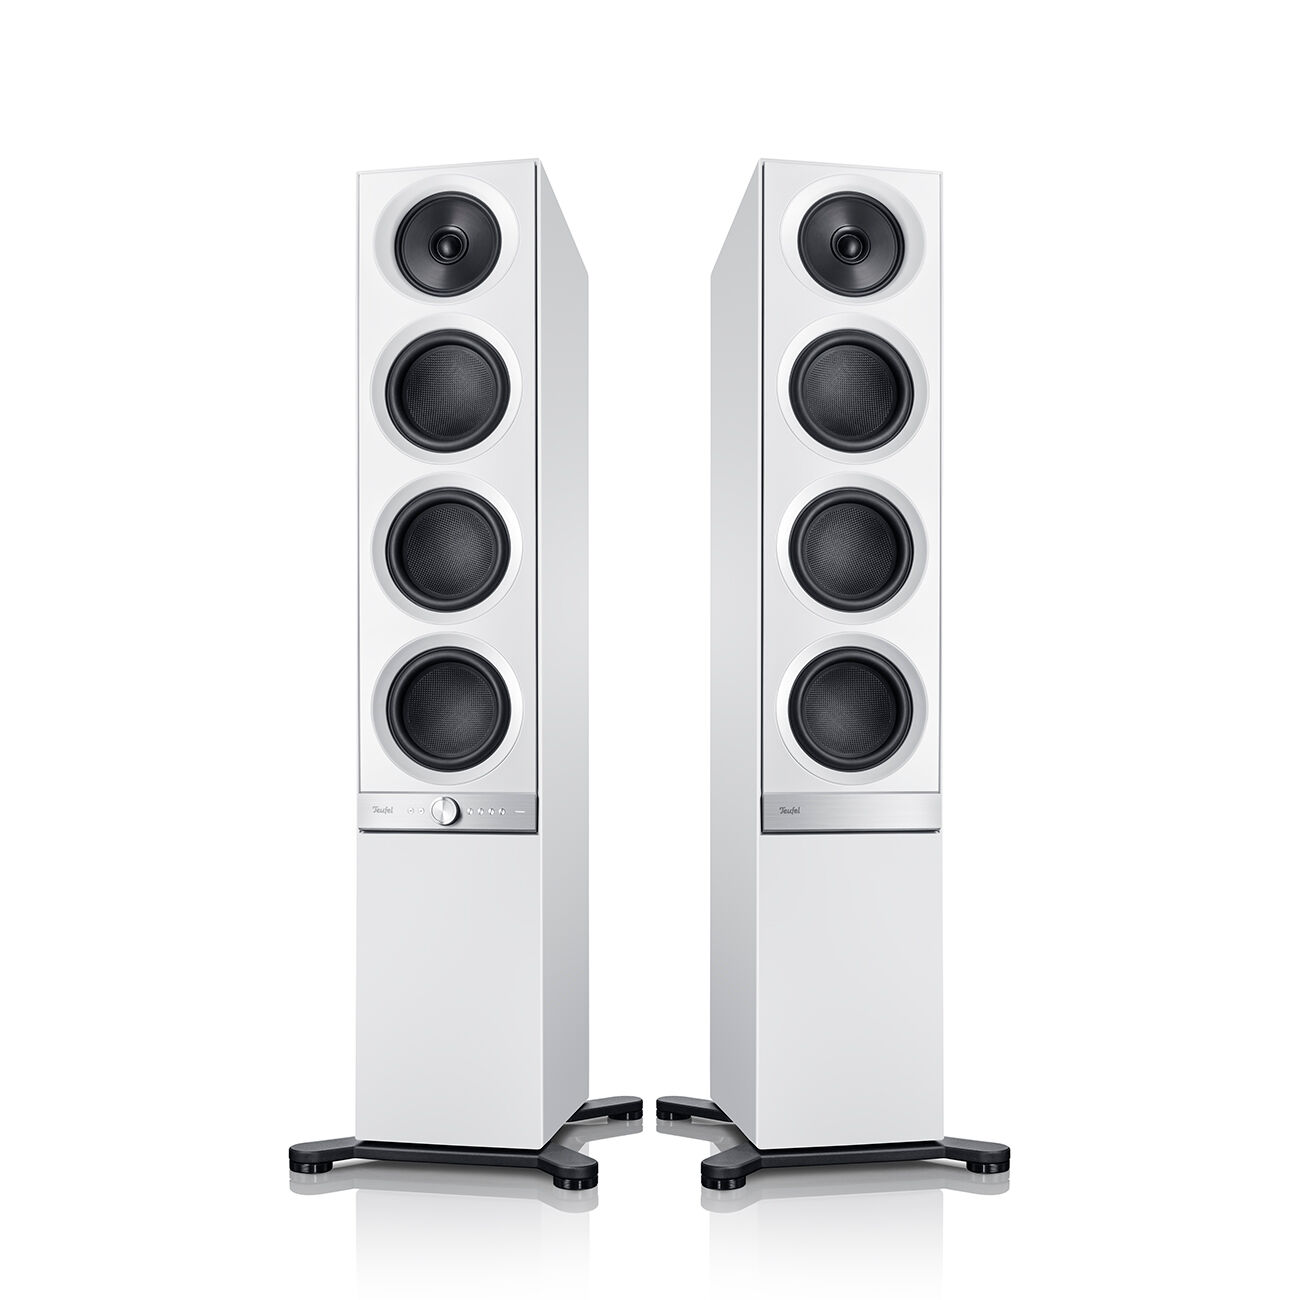 Teufel STEREO L